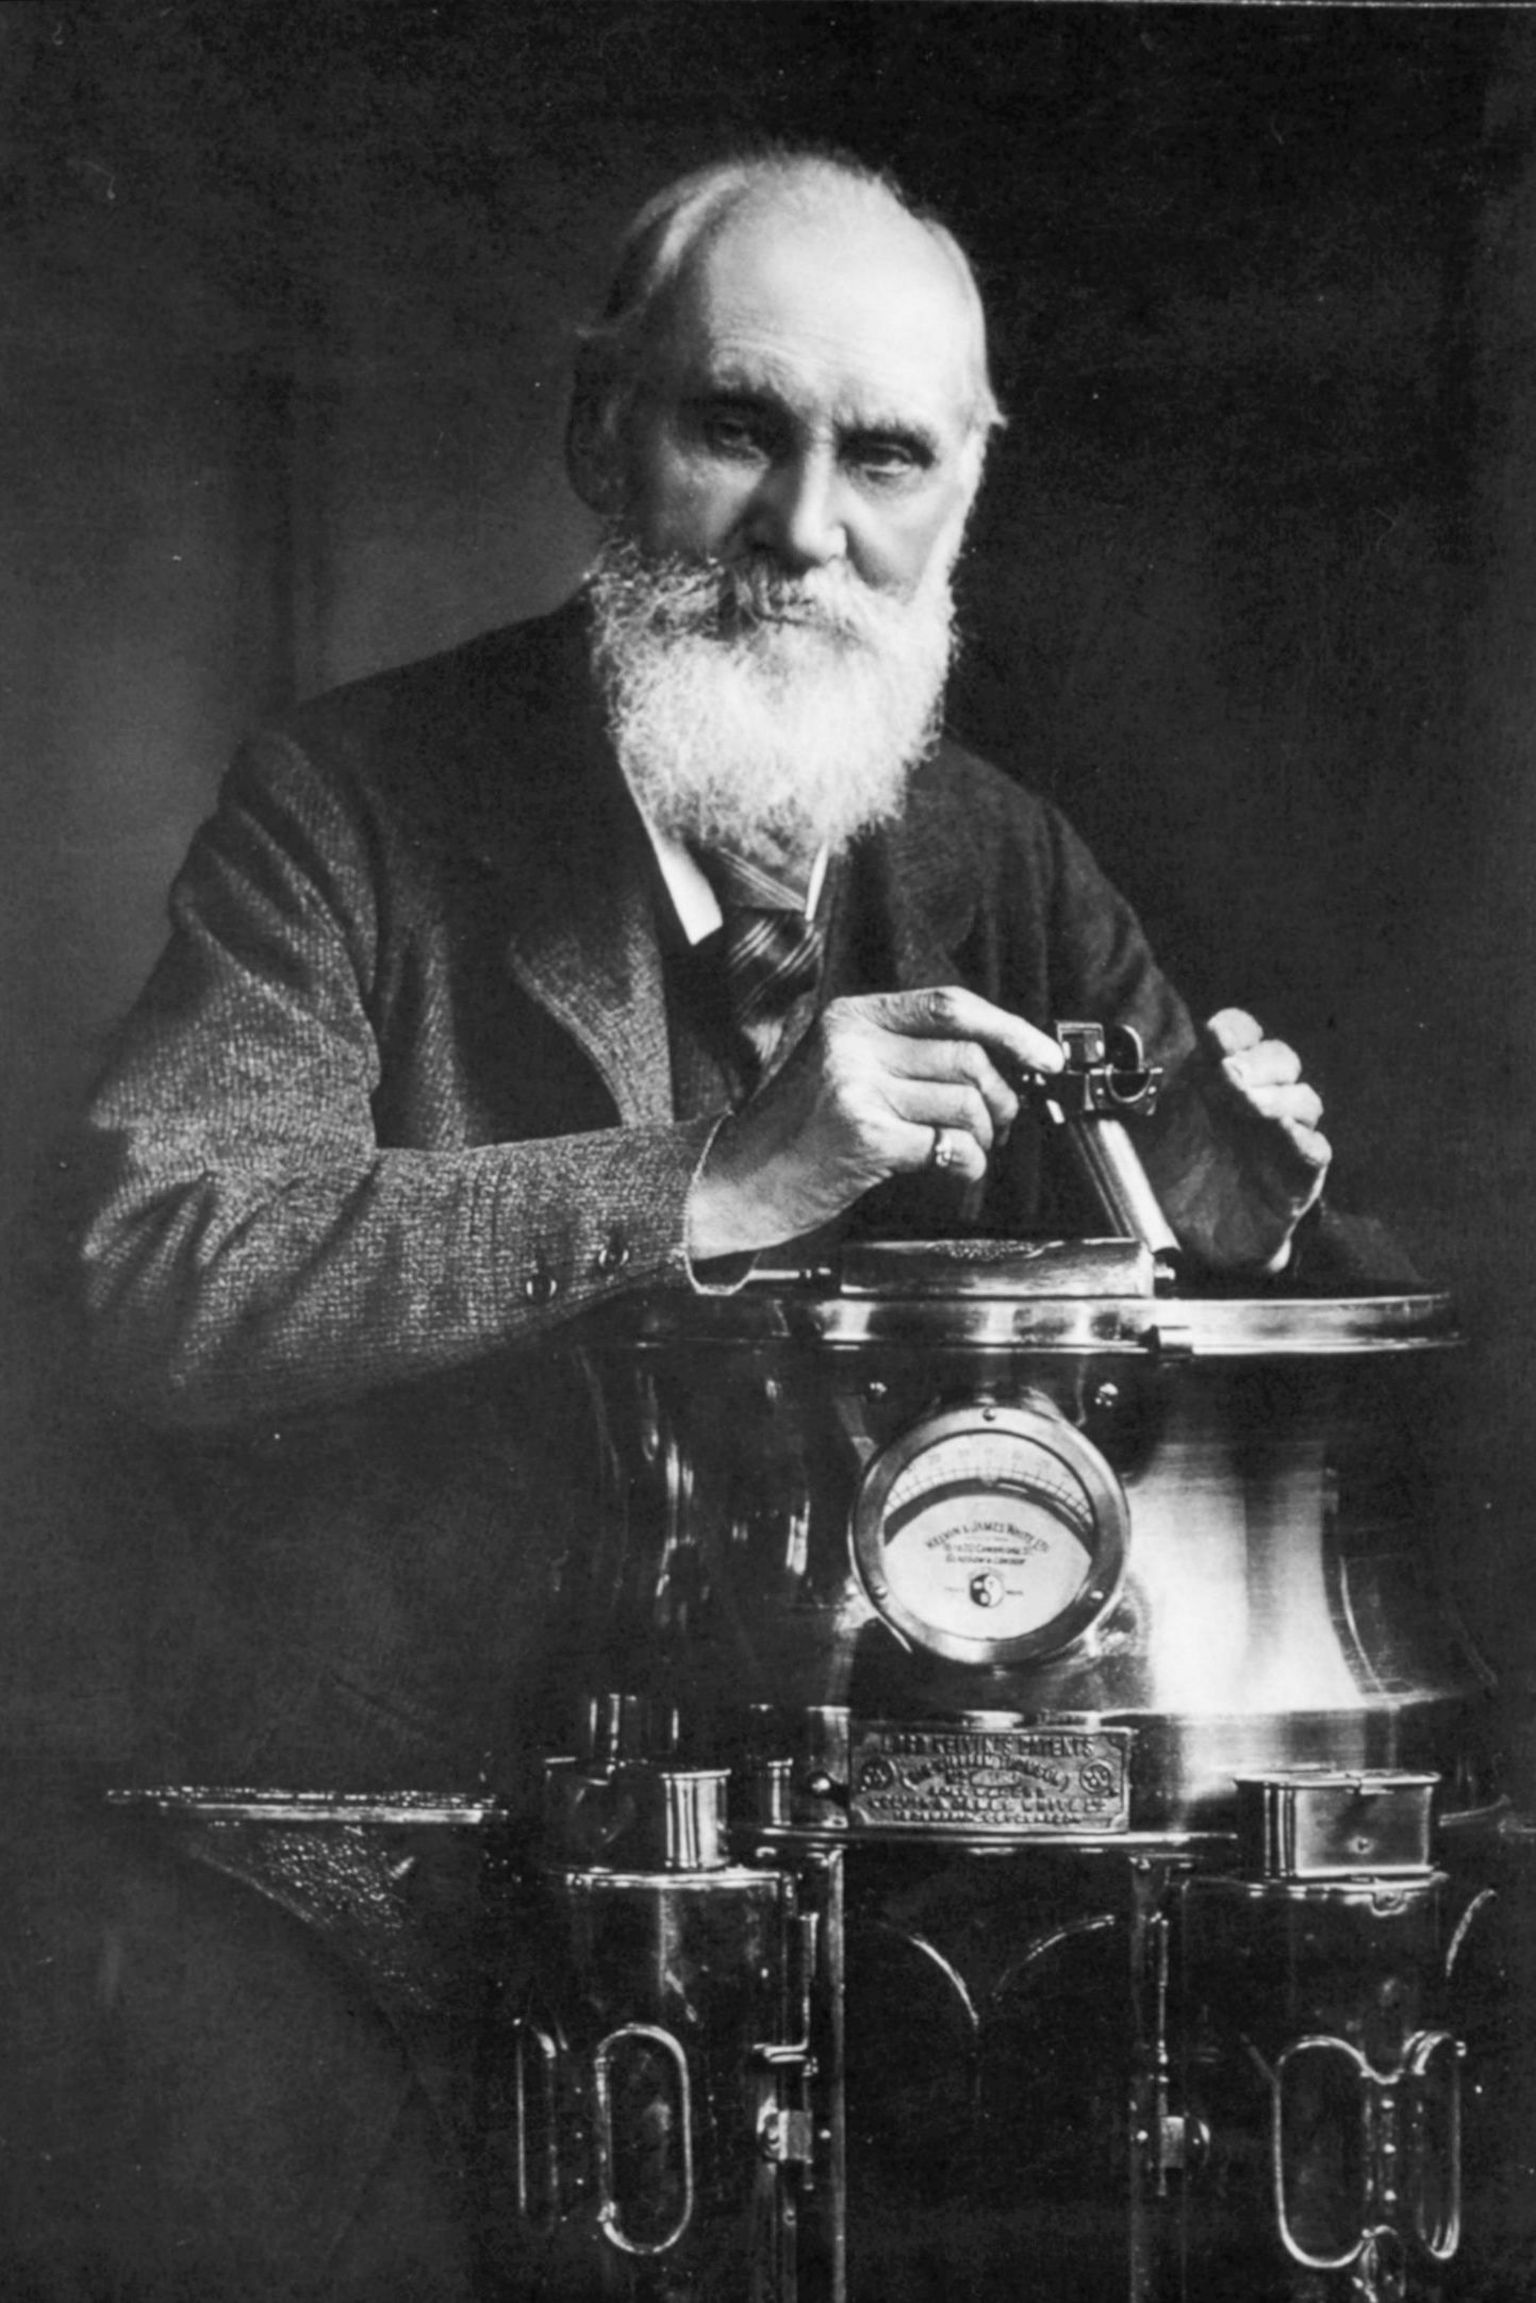 Lord Kelvin posing with a machine